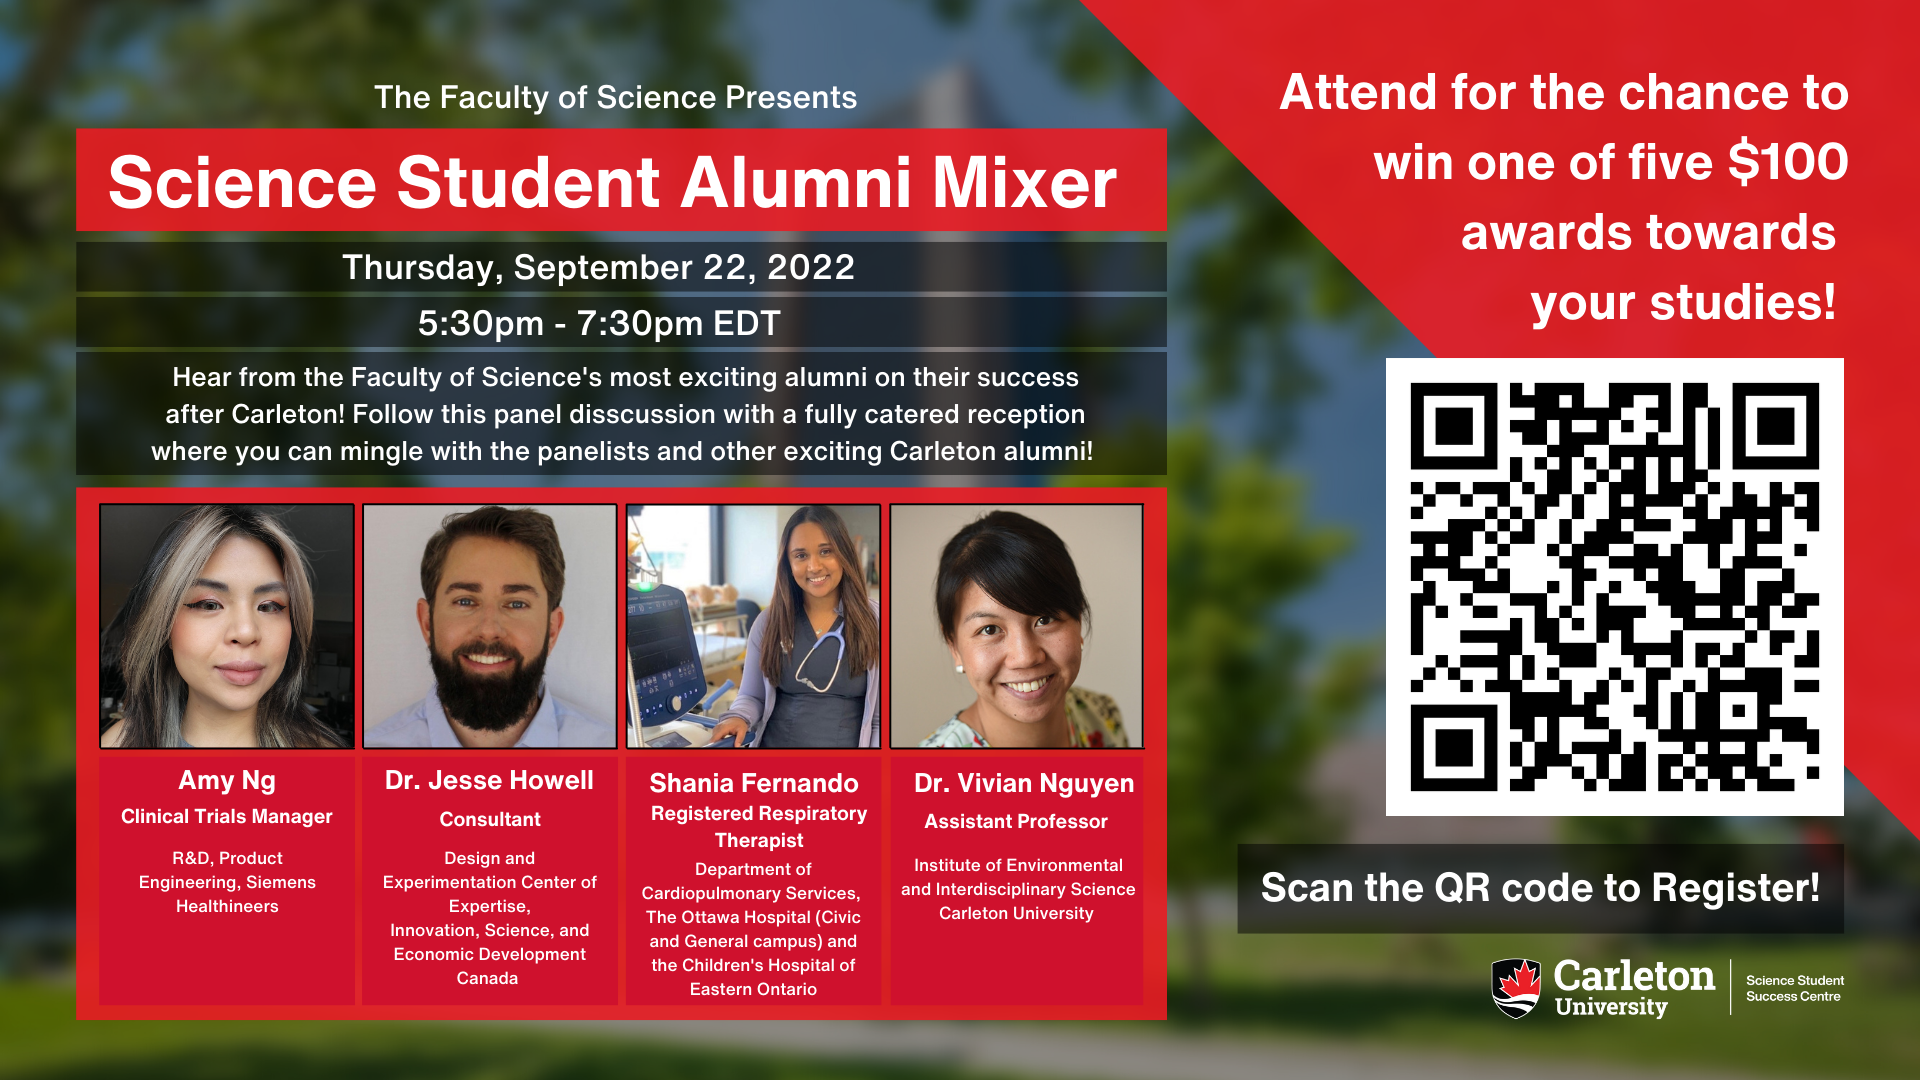 Poster with text. The text reads “The Faculty of Science Presents Science Student Alumni Mixer. Thursday, September 22, 2022. 5:30pm – 7:30pm EDT. Hear from the Faculty of Science's most exciting alumni on their success after Carleton! Follow this panel disscussion with a fully catered reception where you can mingle with the panelists and other exciting Carleton alumni! Amy Ng, Clinical Trials Manager, R&D, Product Engineering, Siemens Healthineers. Dr. Jesse Howell, Consultant, Design and Experimentation Centre of Expertise, Innovation, Science and Economic Development Canada. Shania Fernando, Registered Respitory Therapist, Department of Cardiopulmonary Services,  The Ottawa Hospital (Civic and General campus) and the Children's Hospital of Eastern Ontario. Dr. Vivian Nguyen, Assistant Professor, Institute of Environmental and Interdisciplinary Science  Carleton University. Attend for the chance to win one of five $100 awards towards your studies! Scan QR code to Register! Carleton University Science Student Success Centre